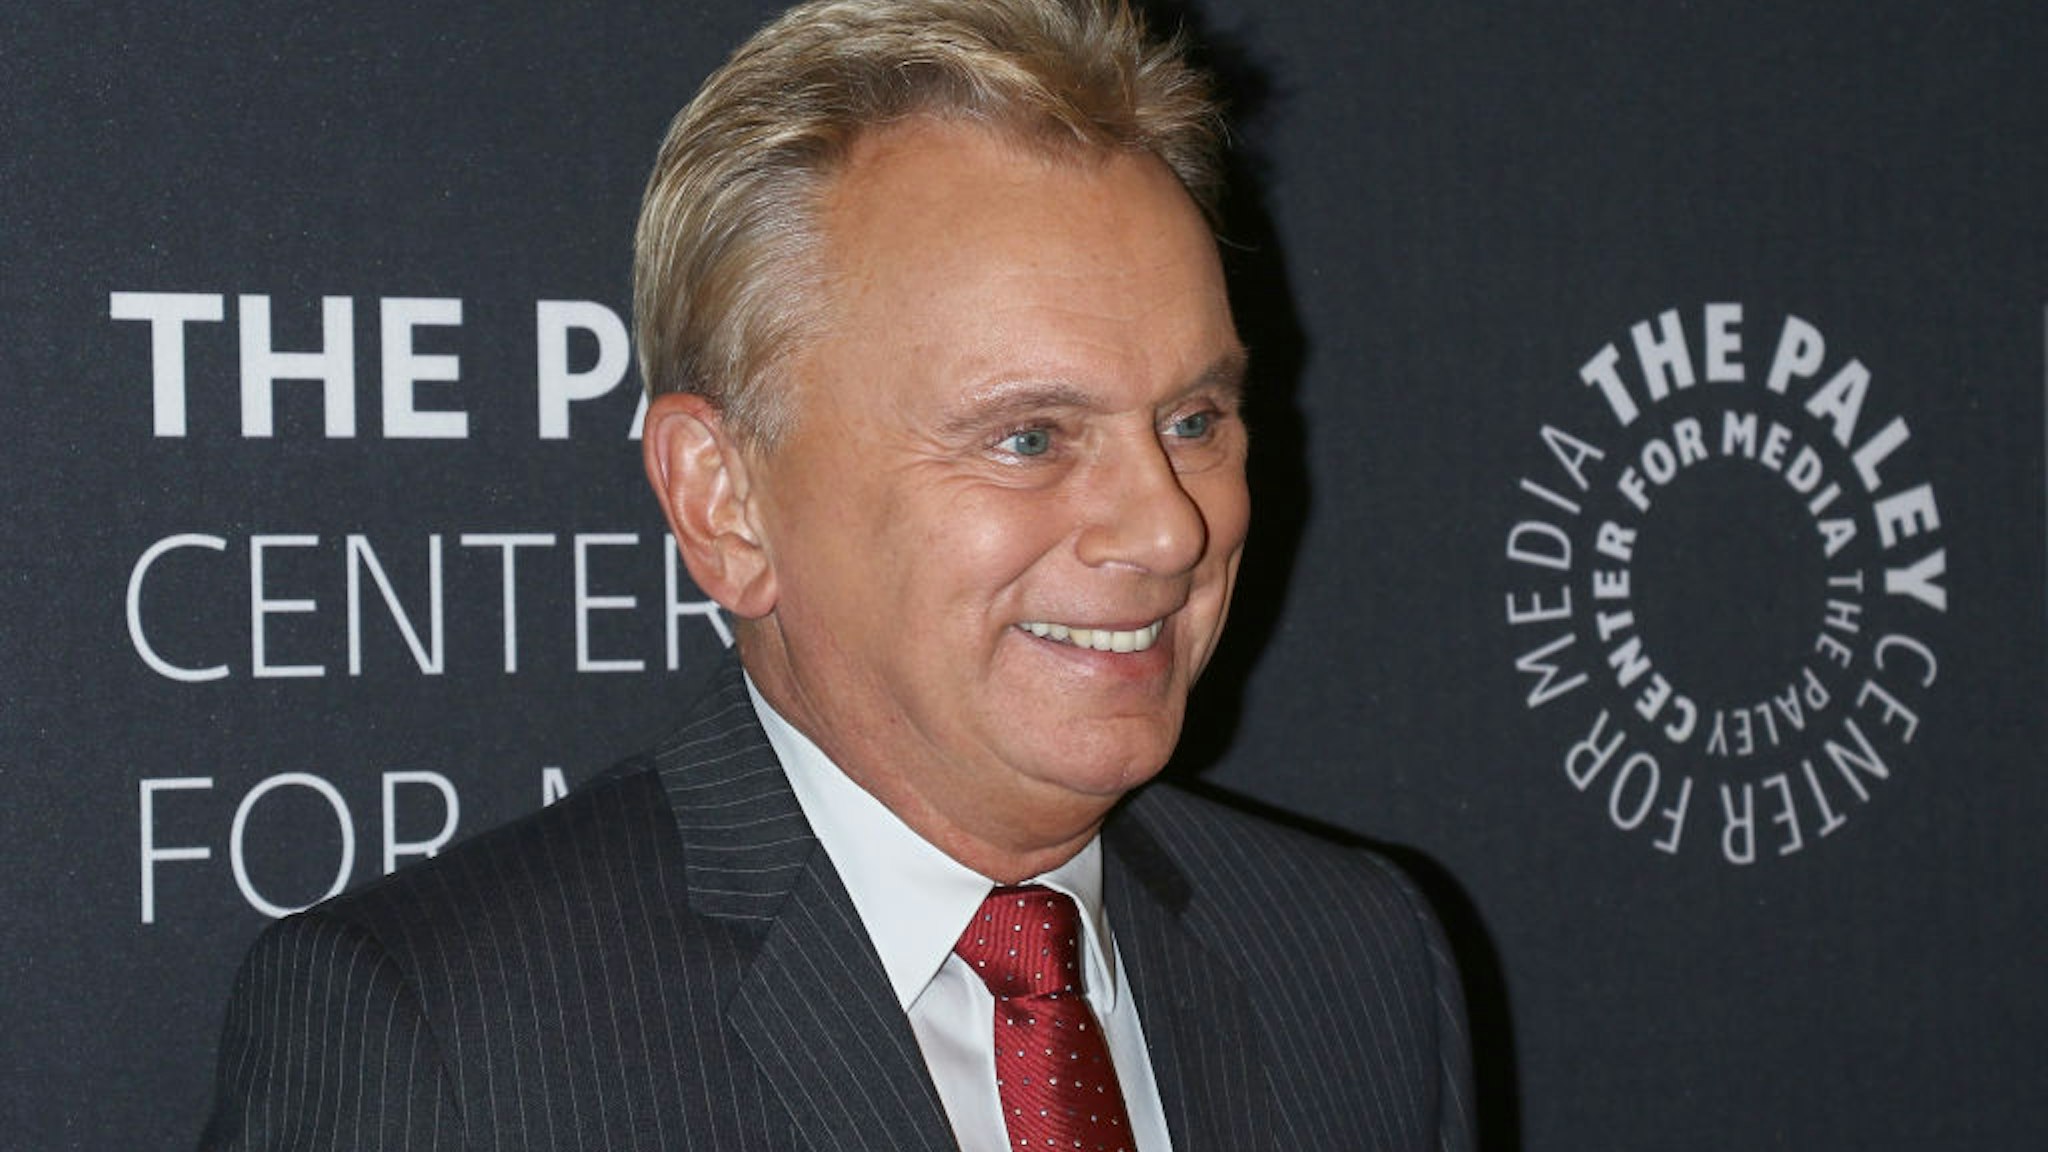 TV personality Pat Sajak attends The Wheel of Fortune: 35 Years as America's Game hosted by The Paley Center For Media at The Paley Center for Media on November 15, 2017 in New York City.